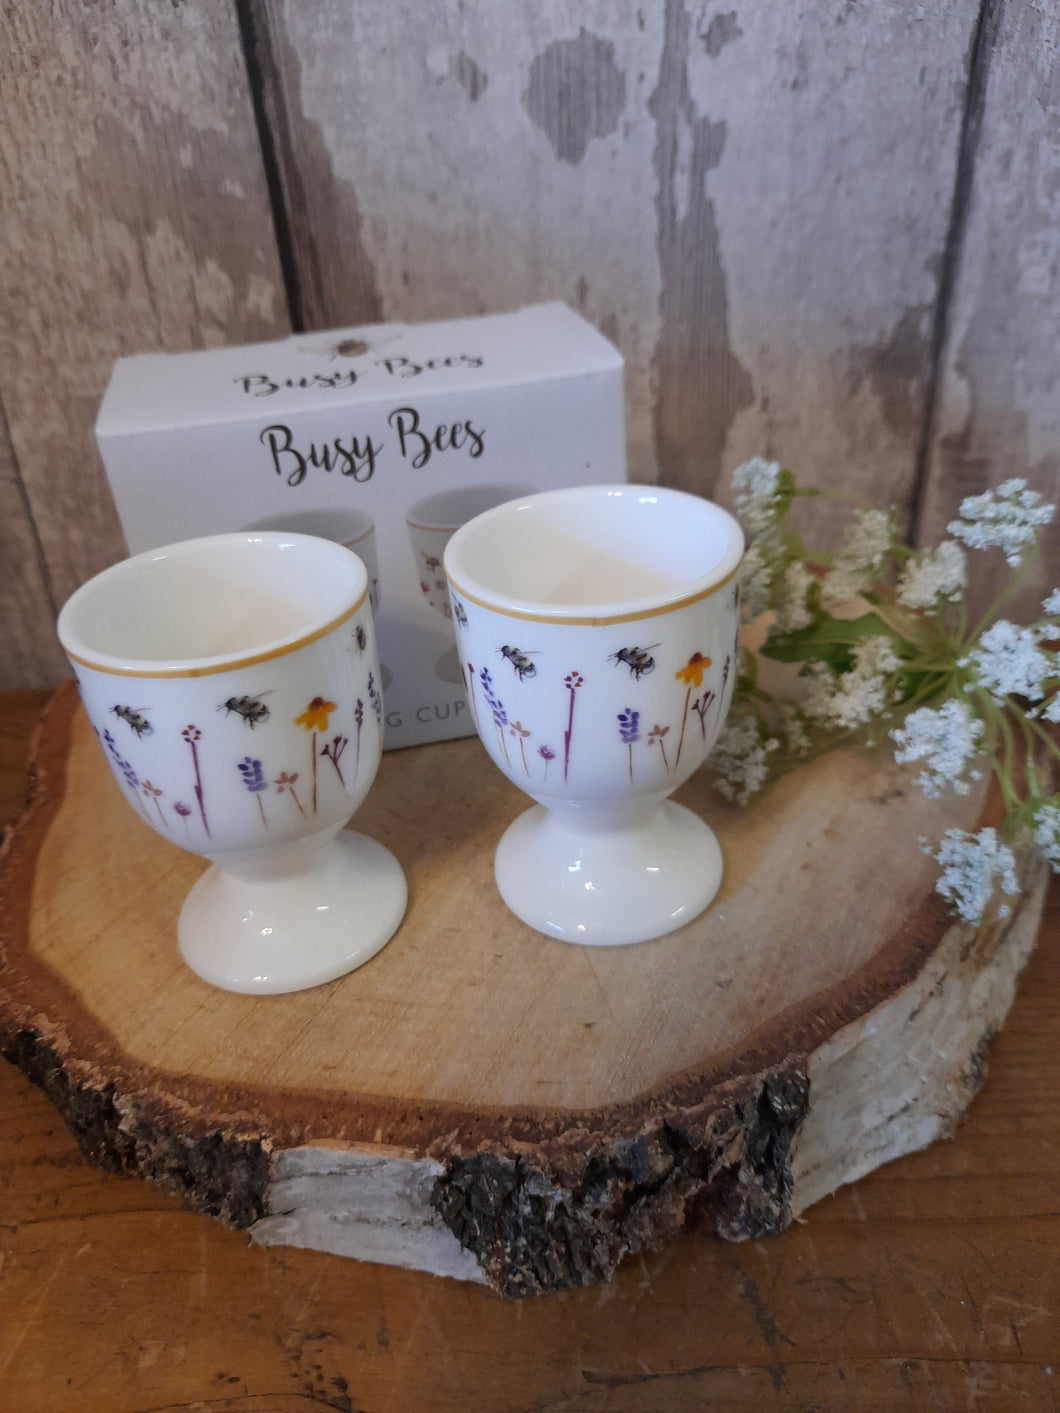 Busy bees egg cups x 2